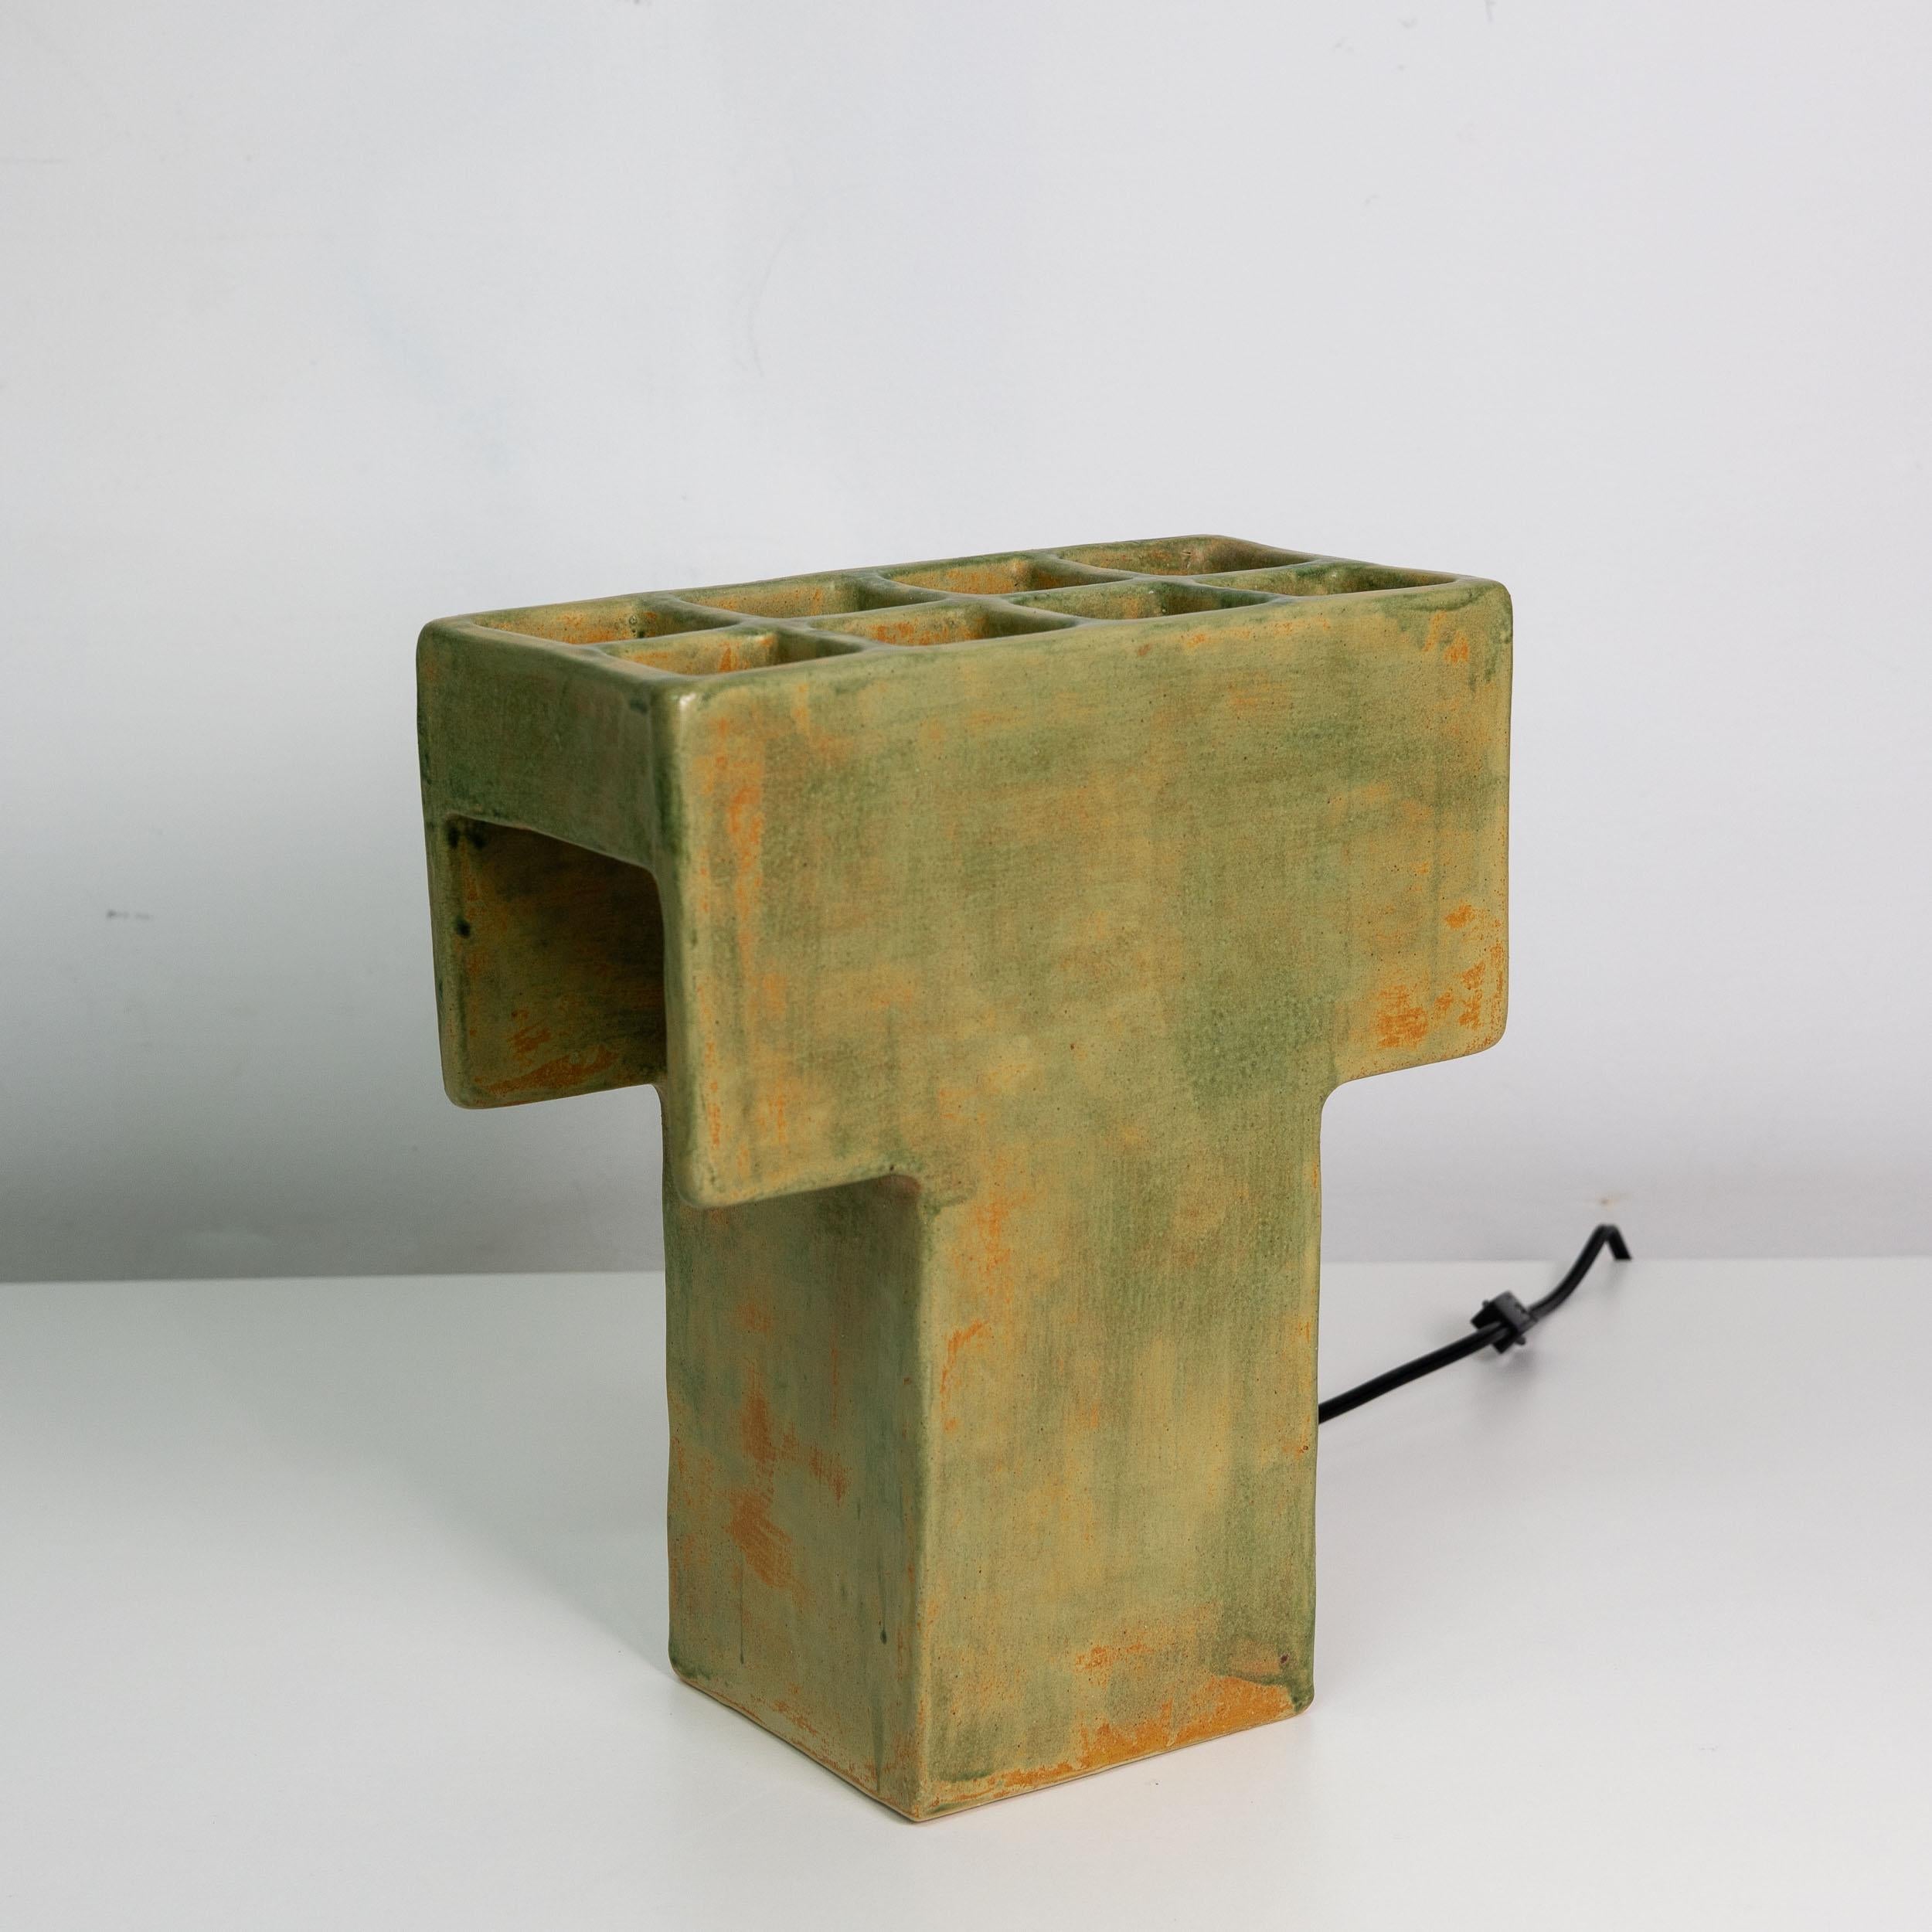 Mr. T Ceramic Table Lamp, Geometric, Brutalist, Square Table Light, Clay, Glazed For Sale 1